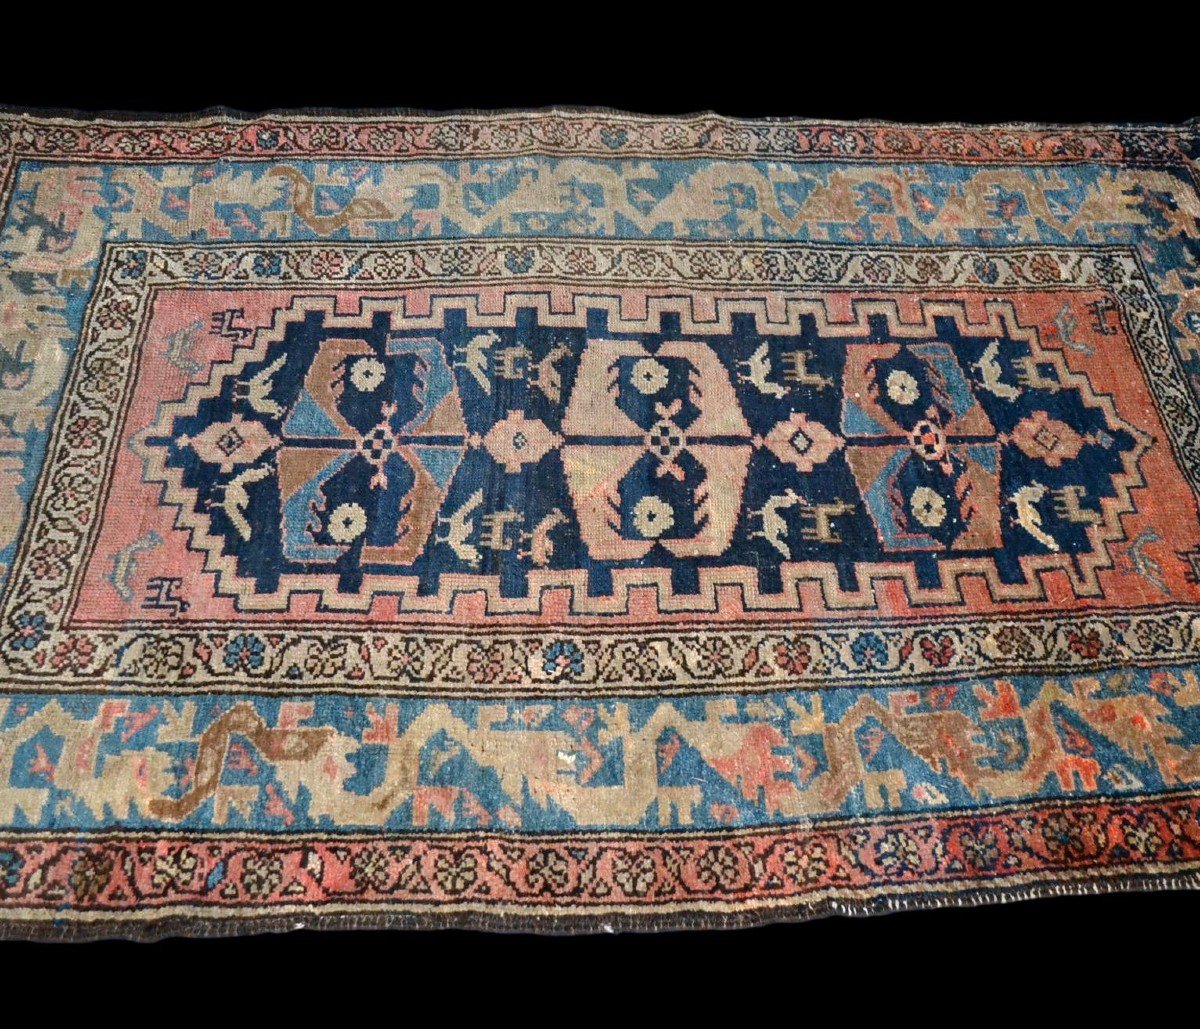 Old Chirvan Carpet, Caucasus, 115 Cm X 176 Cm, Hand-knotted Wool, 19th Century-photo-1